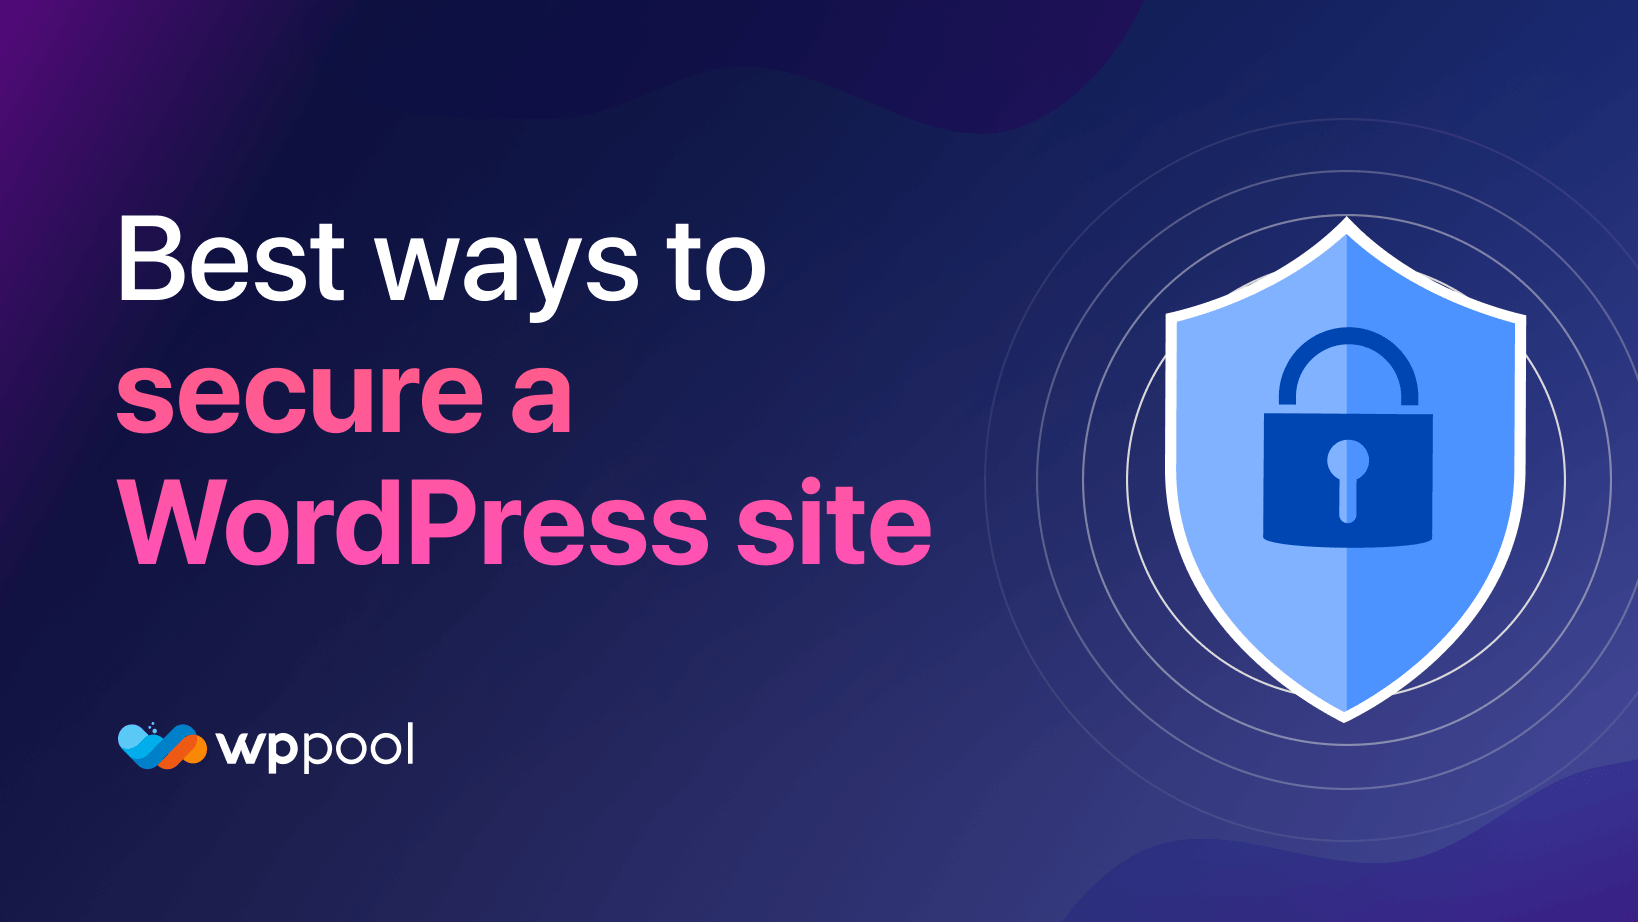 9 best ways to secure a WordPress site